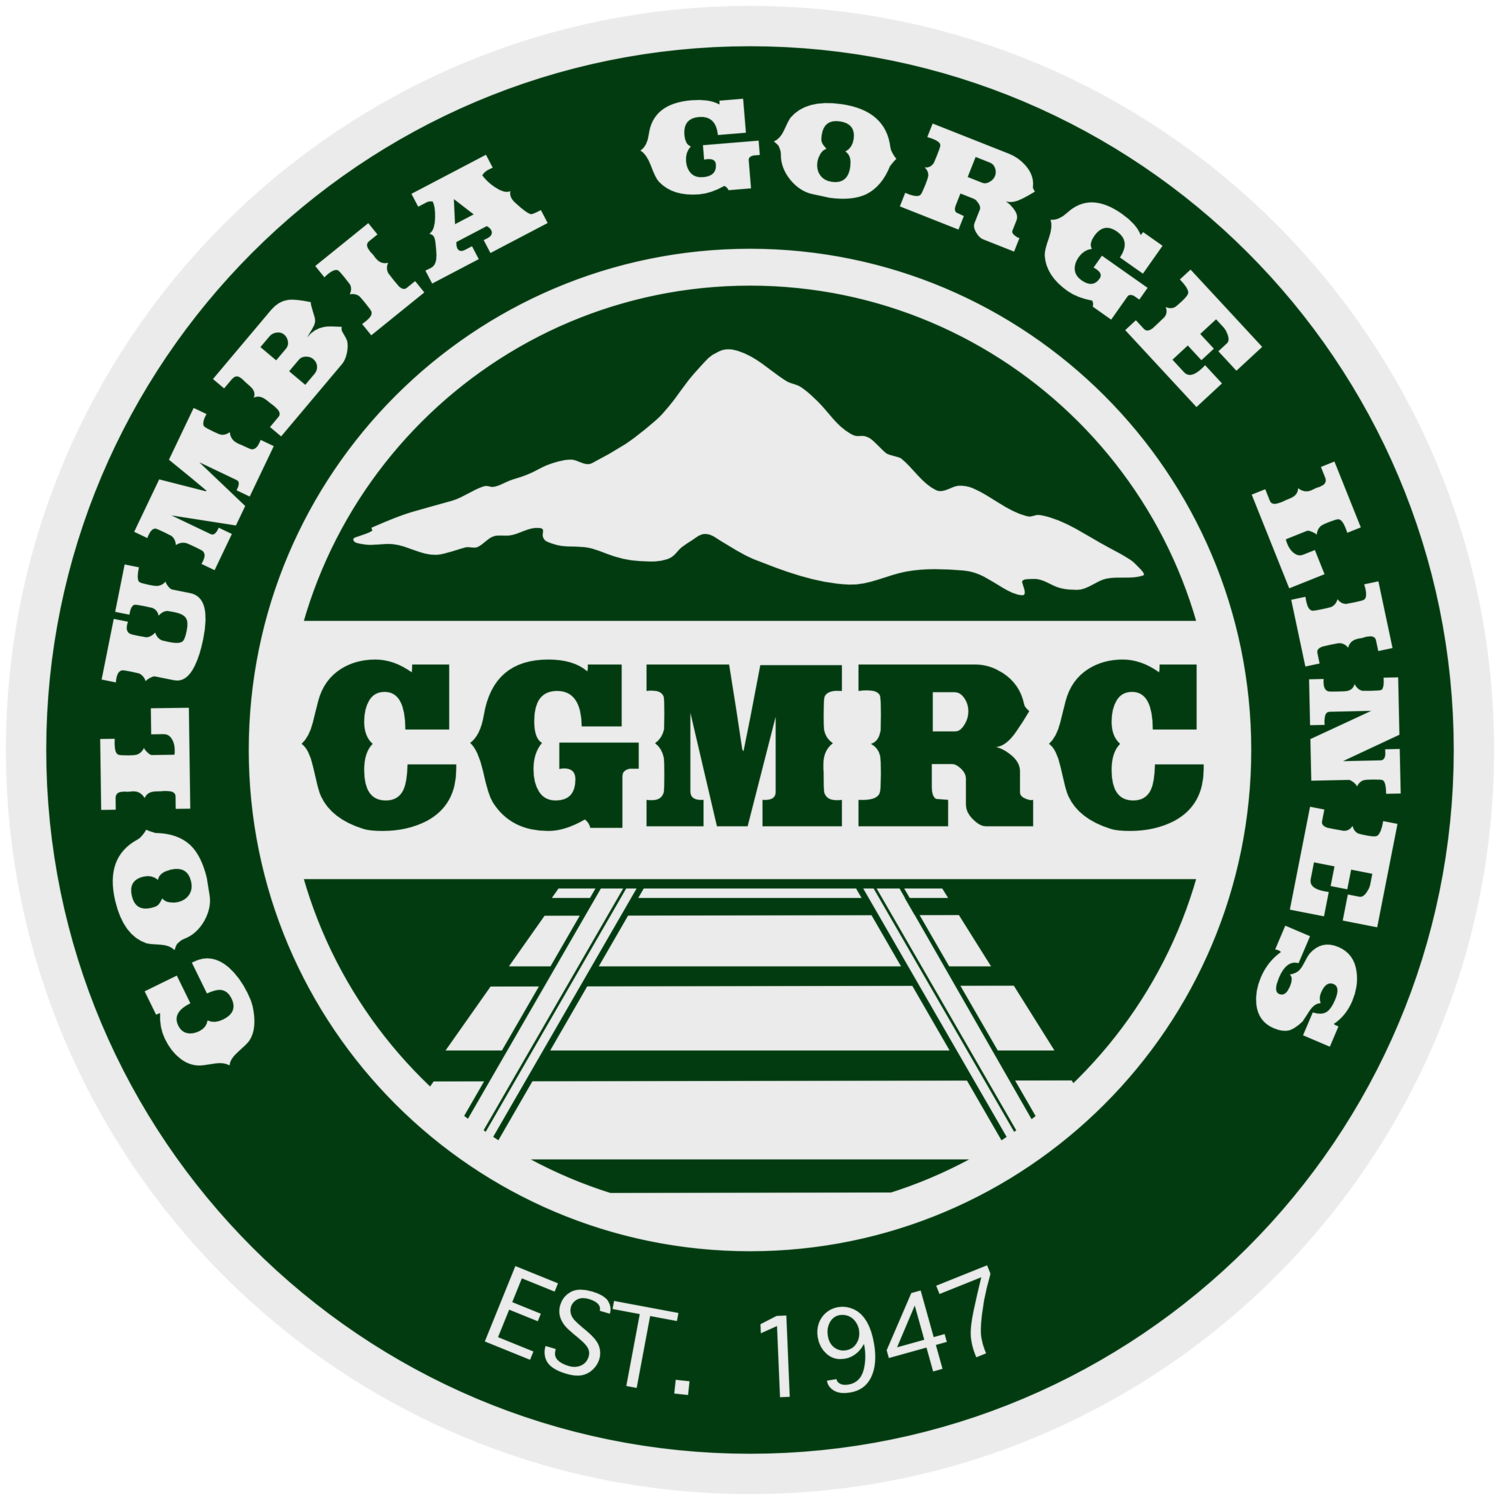 CGMRC